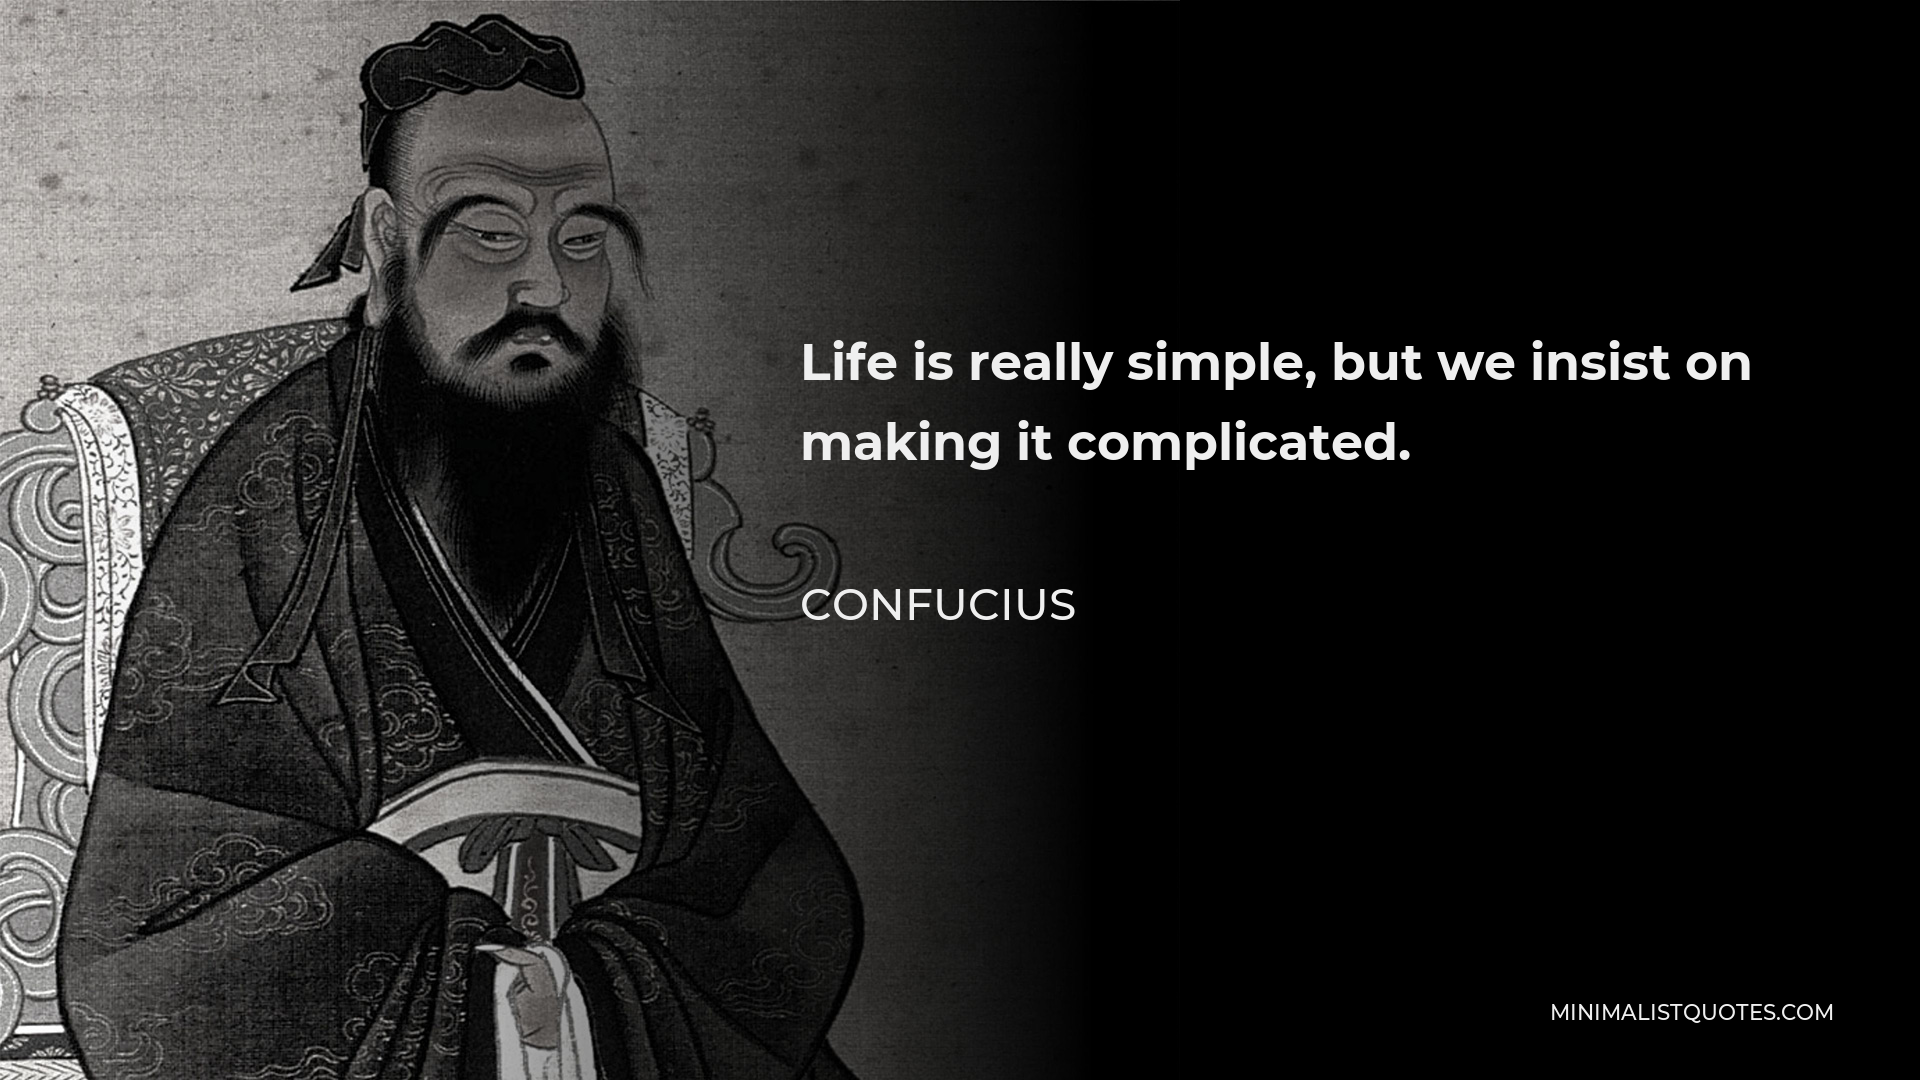 Confucius Quote - Life is really simple, but we insist on making it complicated.